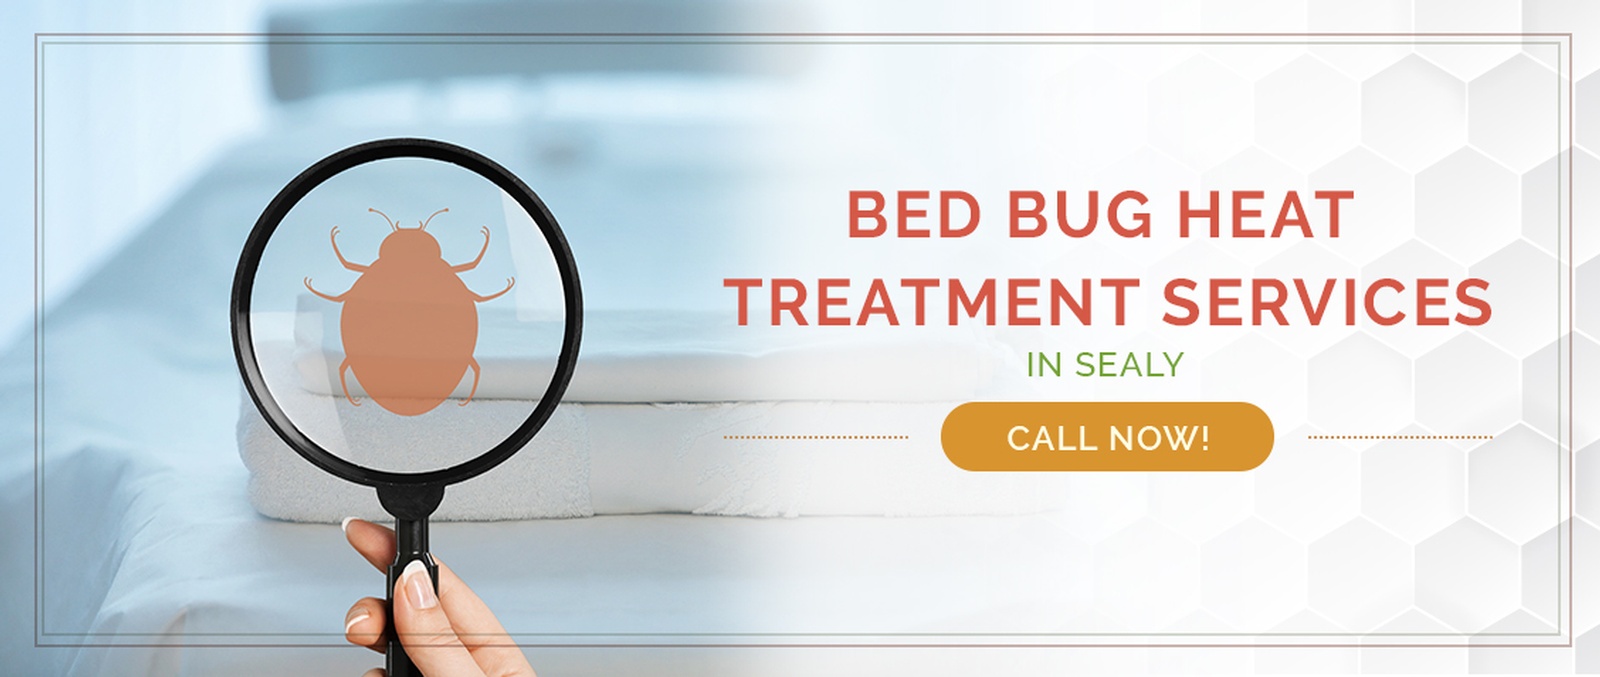 Sealy Bed Bug Treatment / Heater Rental Services by Houston Bed Bug Heaters